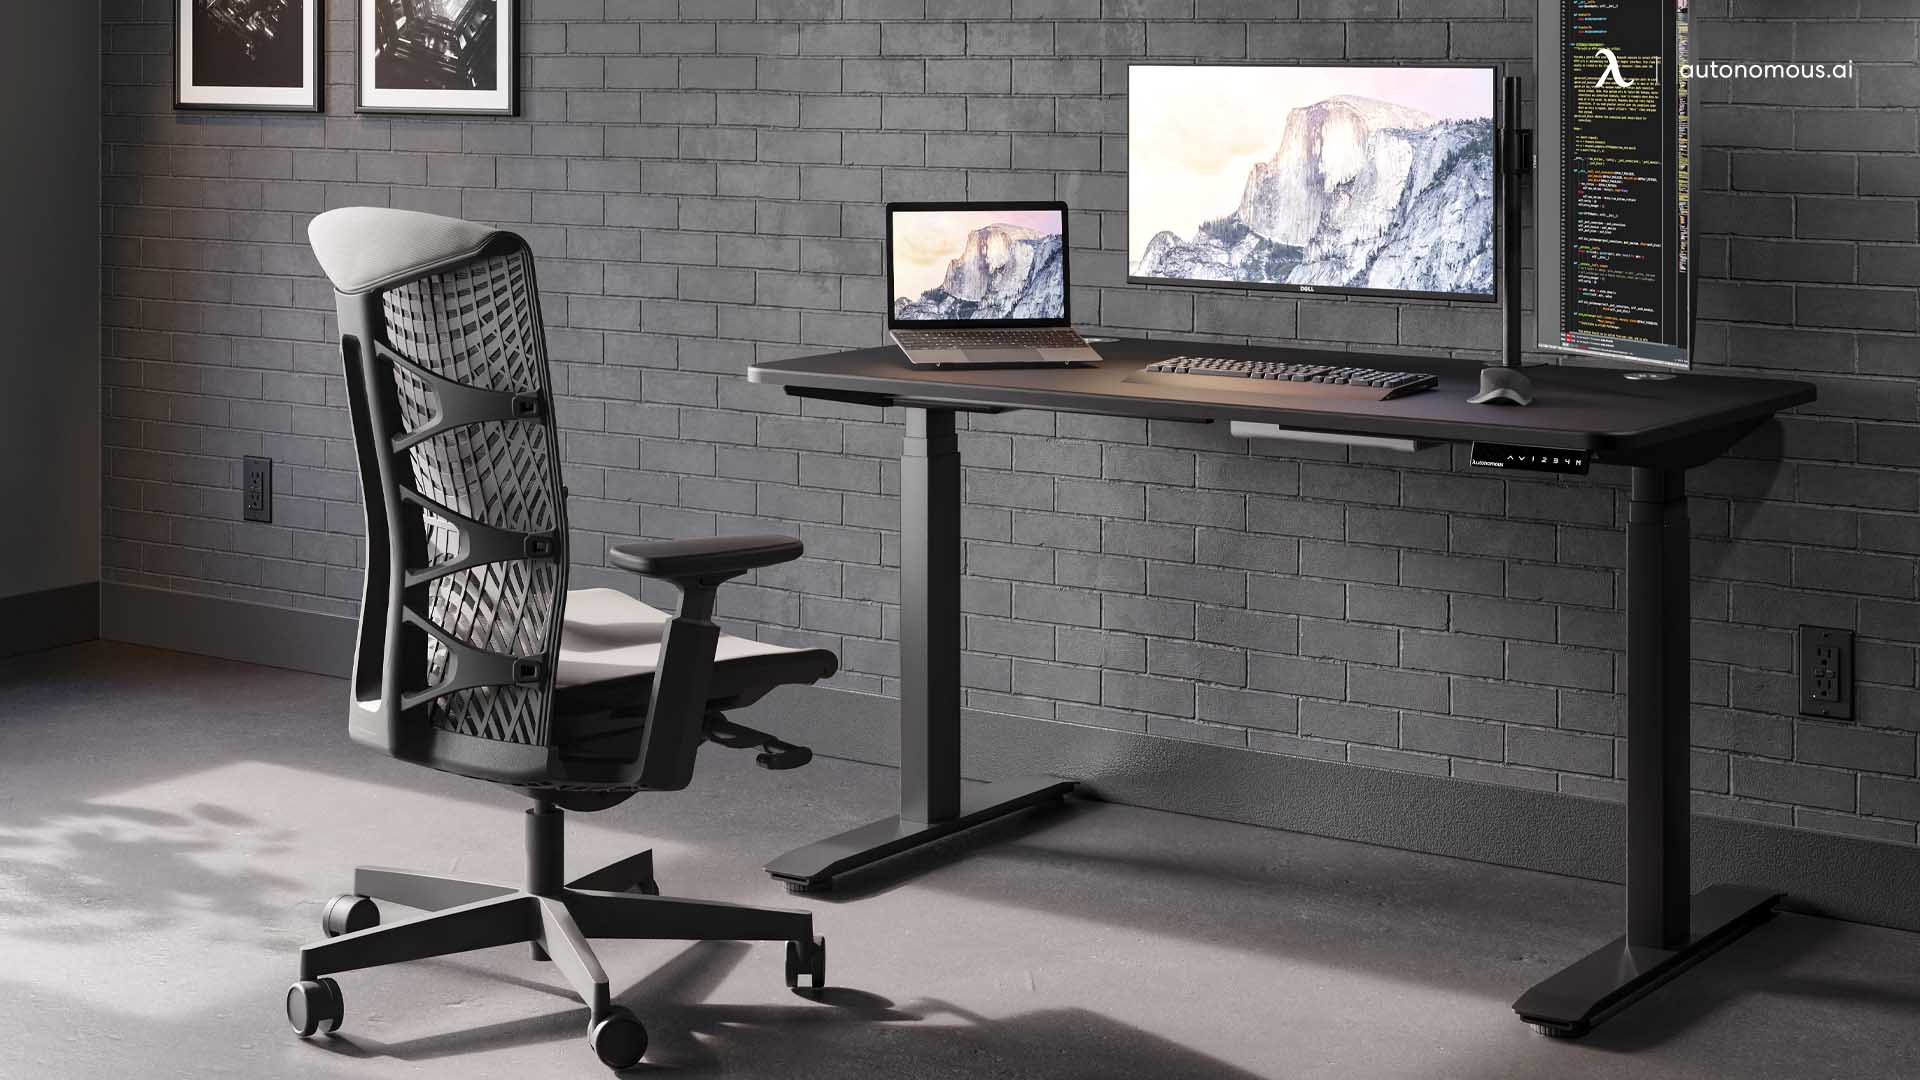 ErgoChair Pro+ furniture for tall people